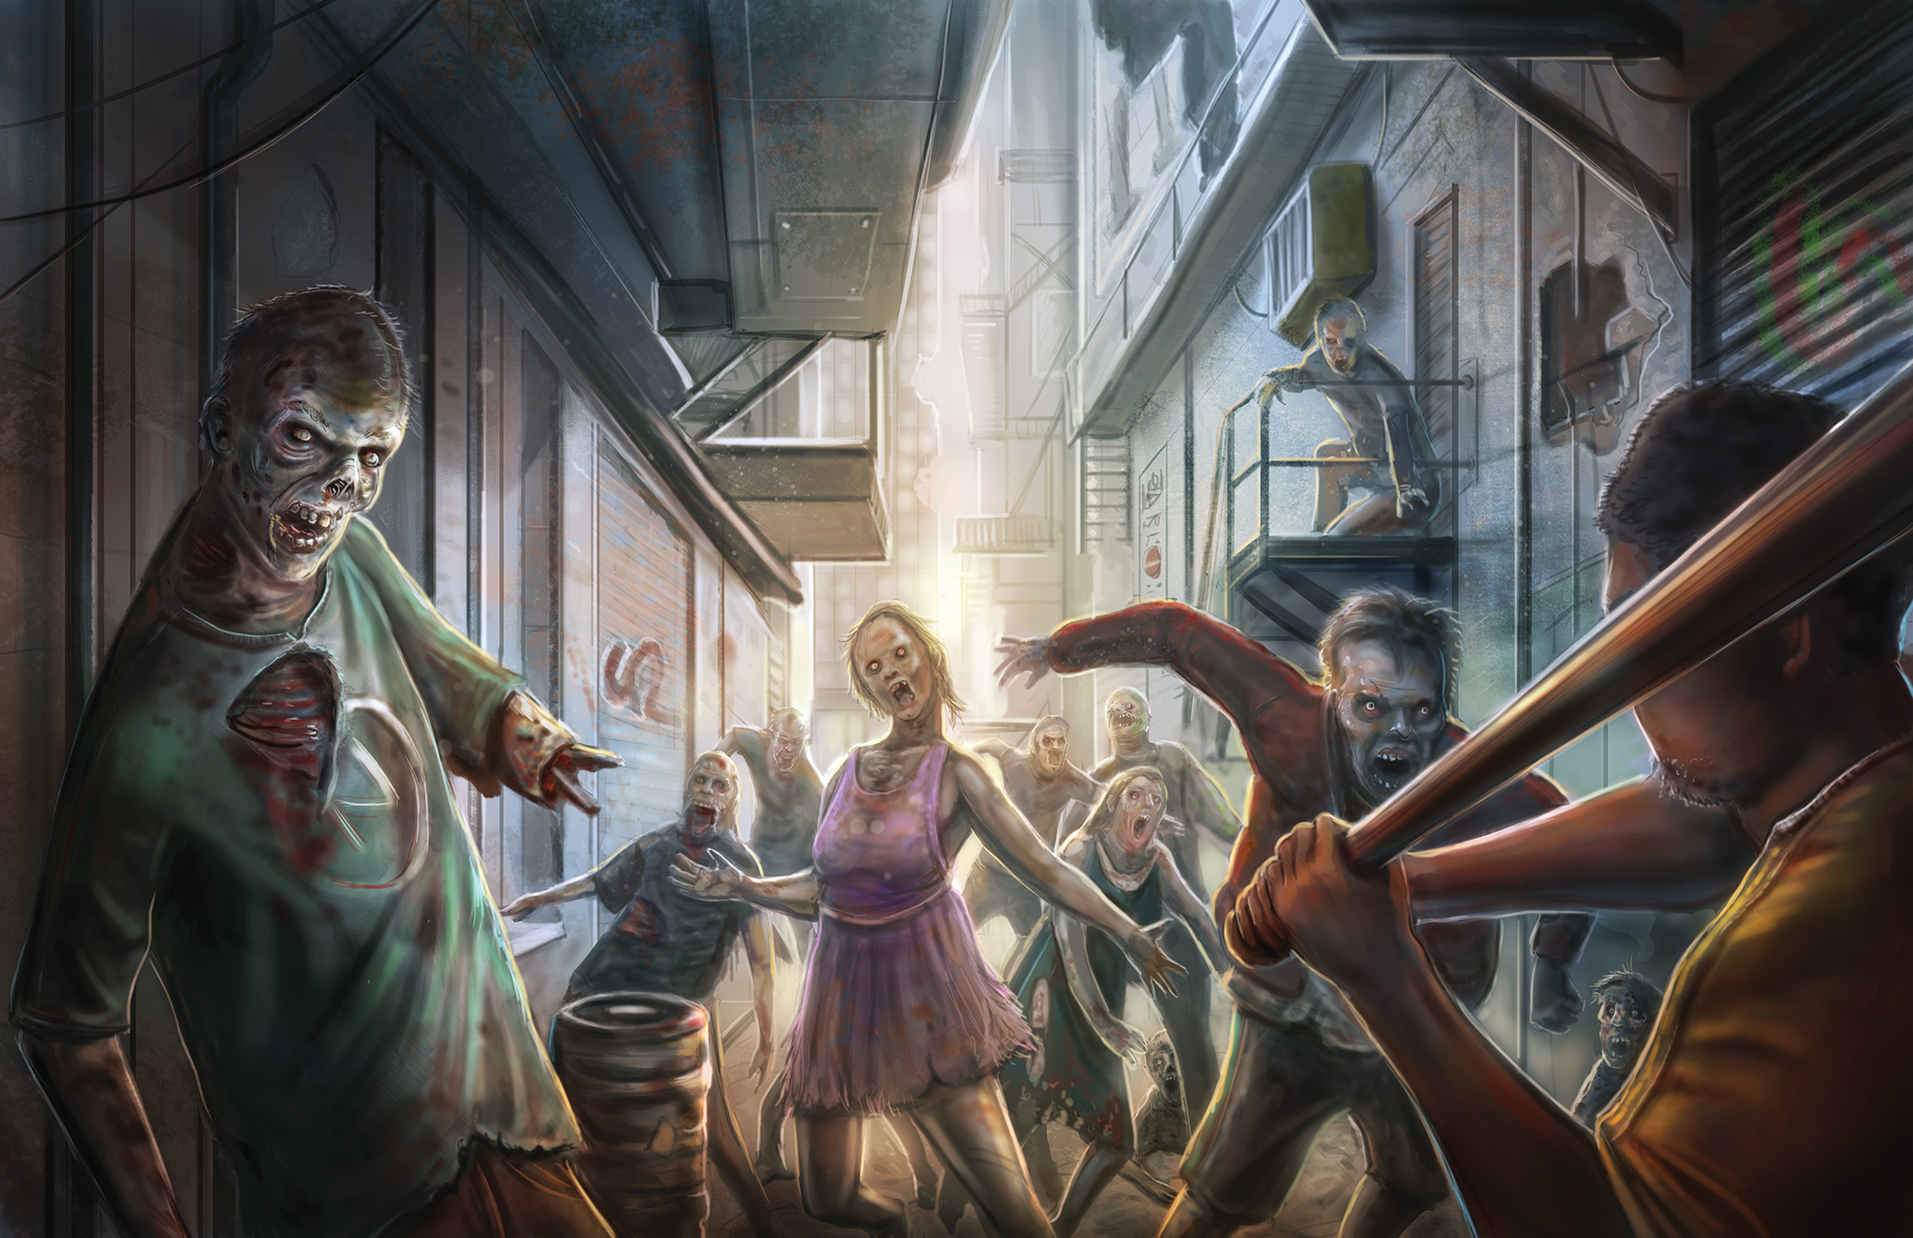 a zombie attack down a tight alleyway. Man fighting with a baseball bat. Art by the noble artist